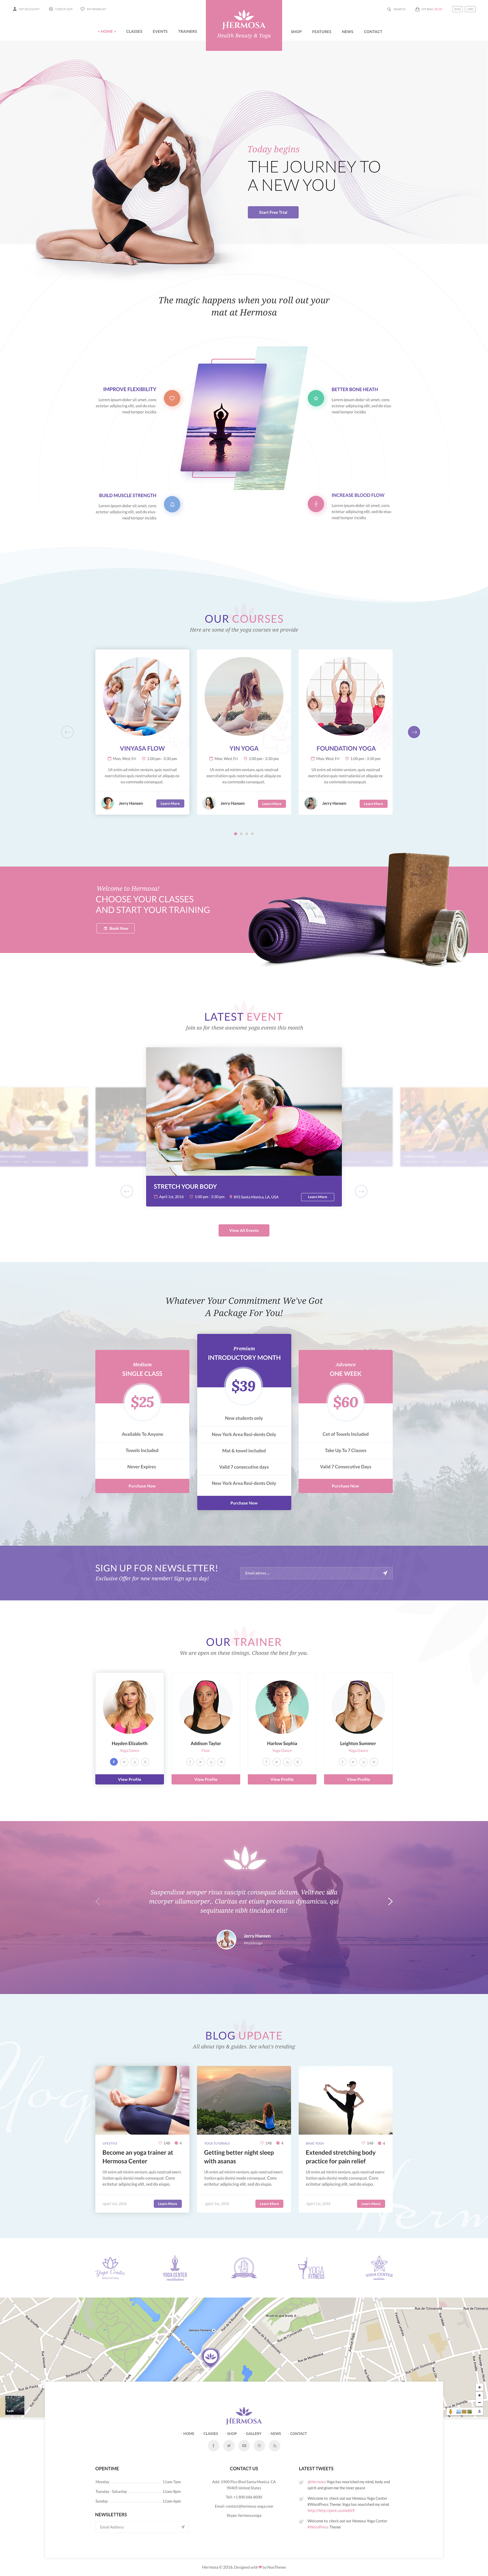 beauty class Event fitness Health membership package schedule Spa timetable Wellness Yoga yoga psd template